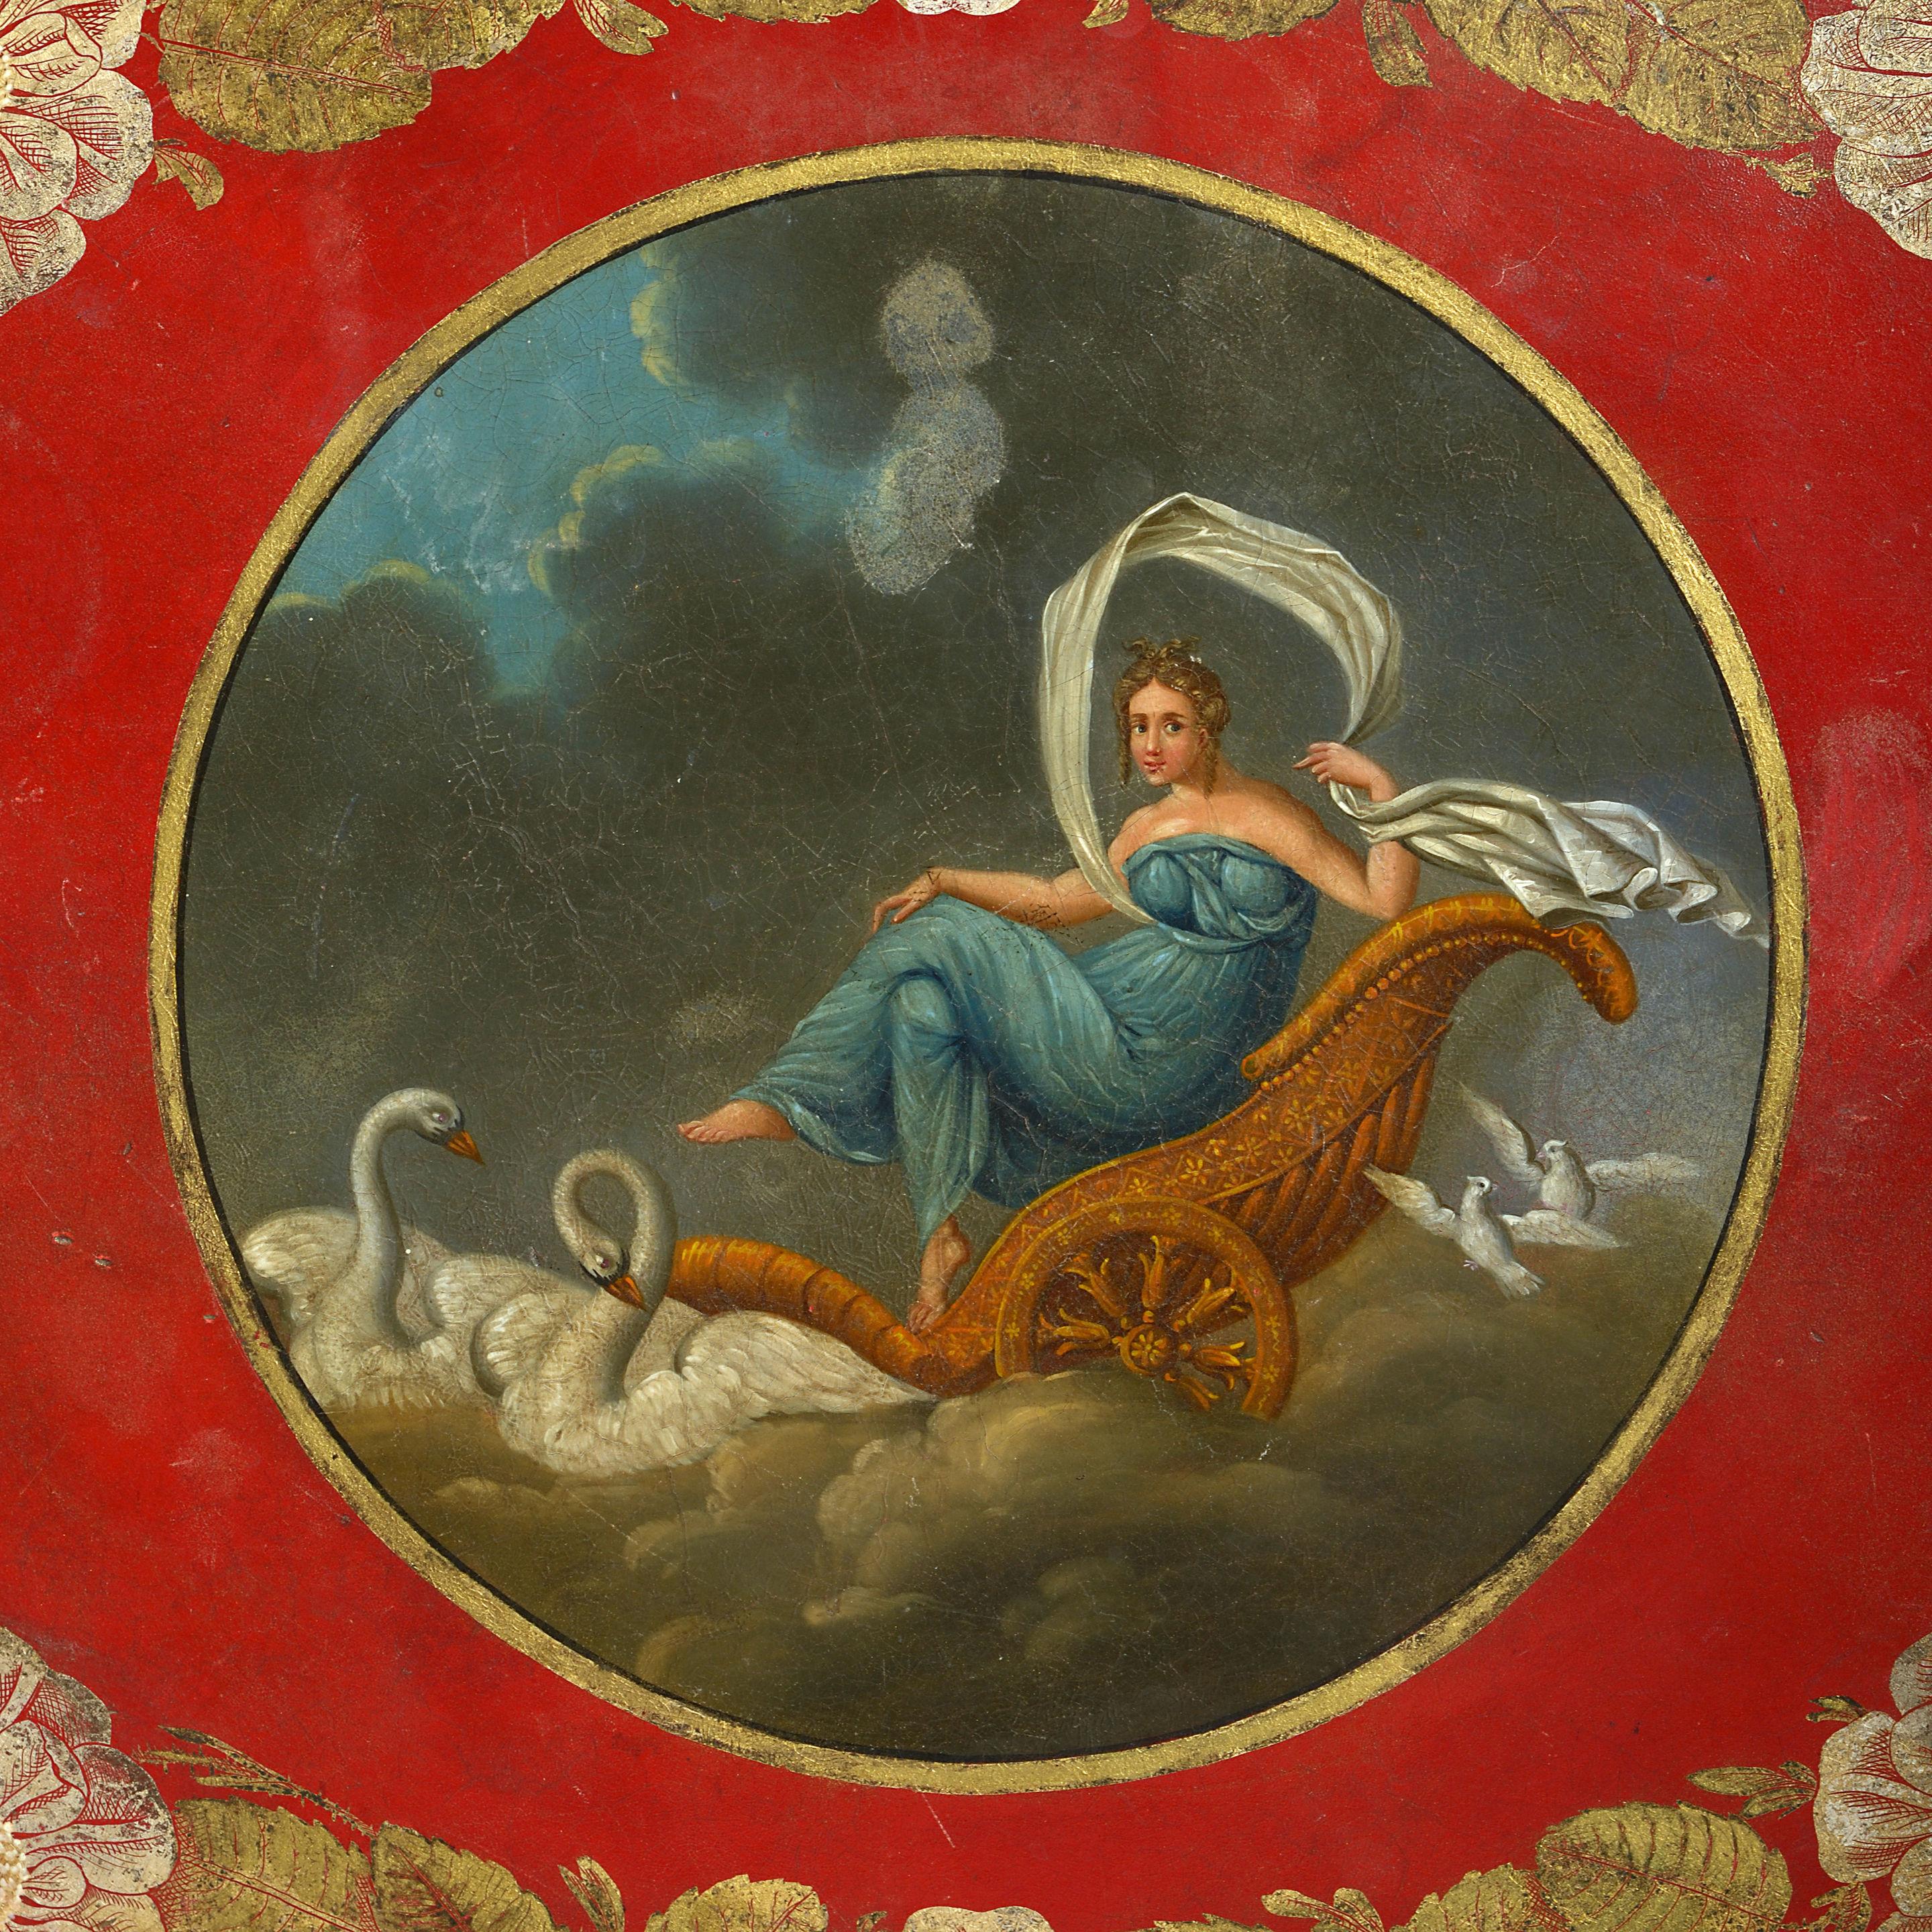 An early 19th century Regency period tole tray with carrying handles, having polychrome and gilded decoration of a female seated upon a carriage with swans, a floral and foliate border, all on a red ground.